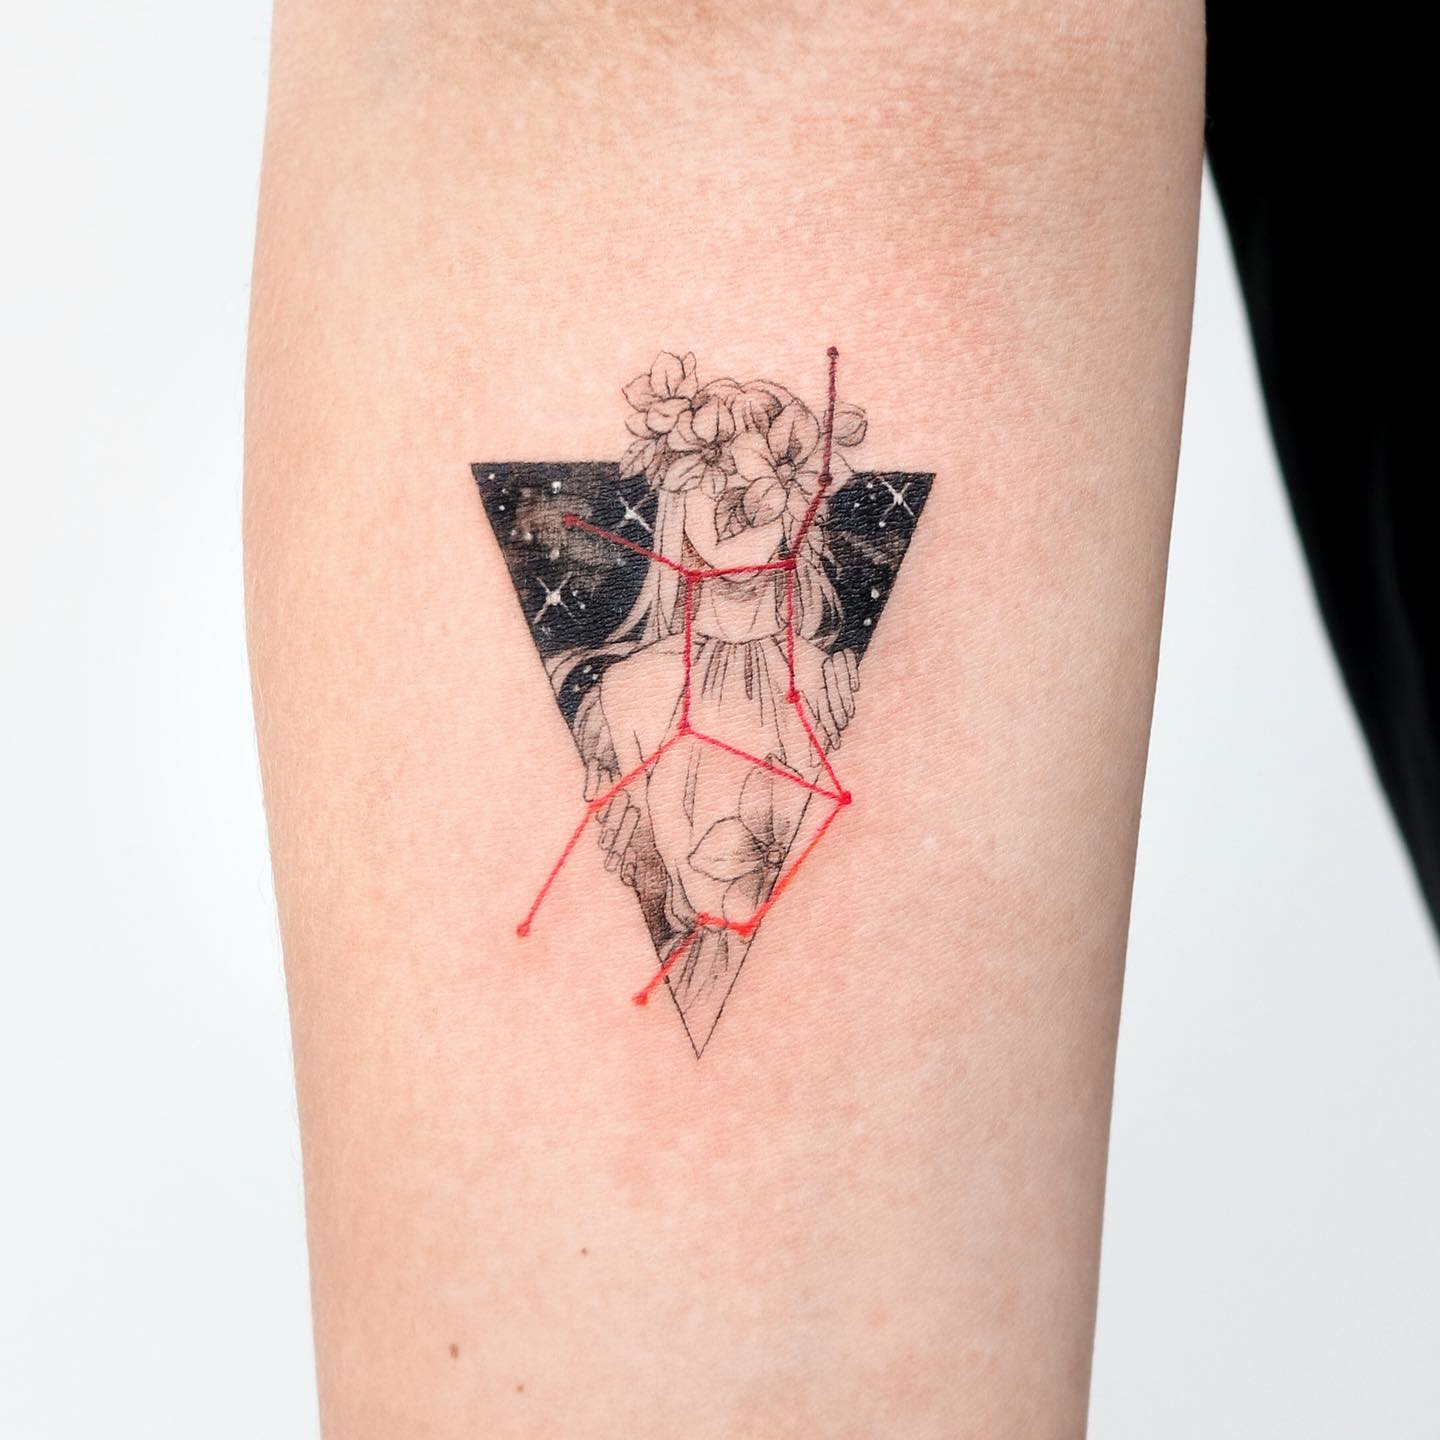 Virgo lady and constellation tattoo on the inner forearm